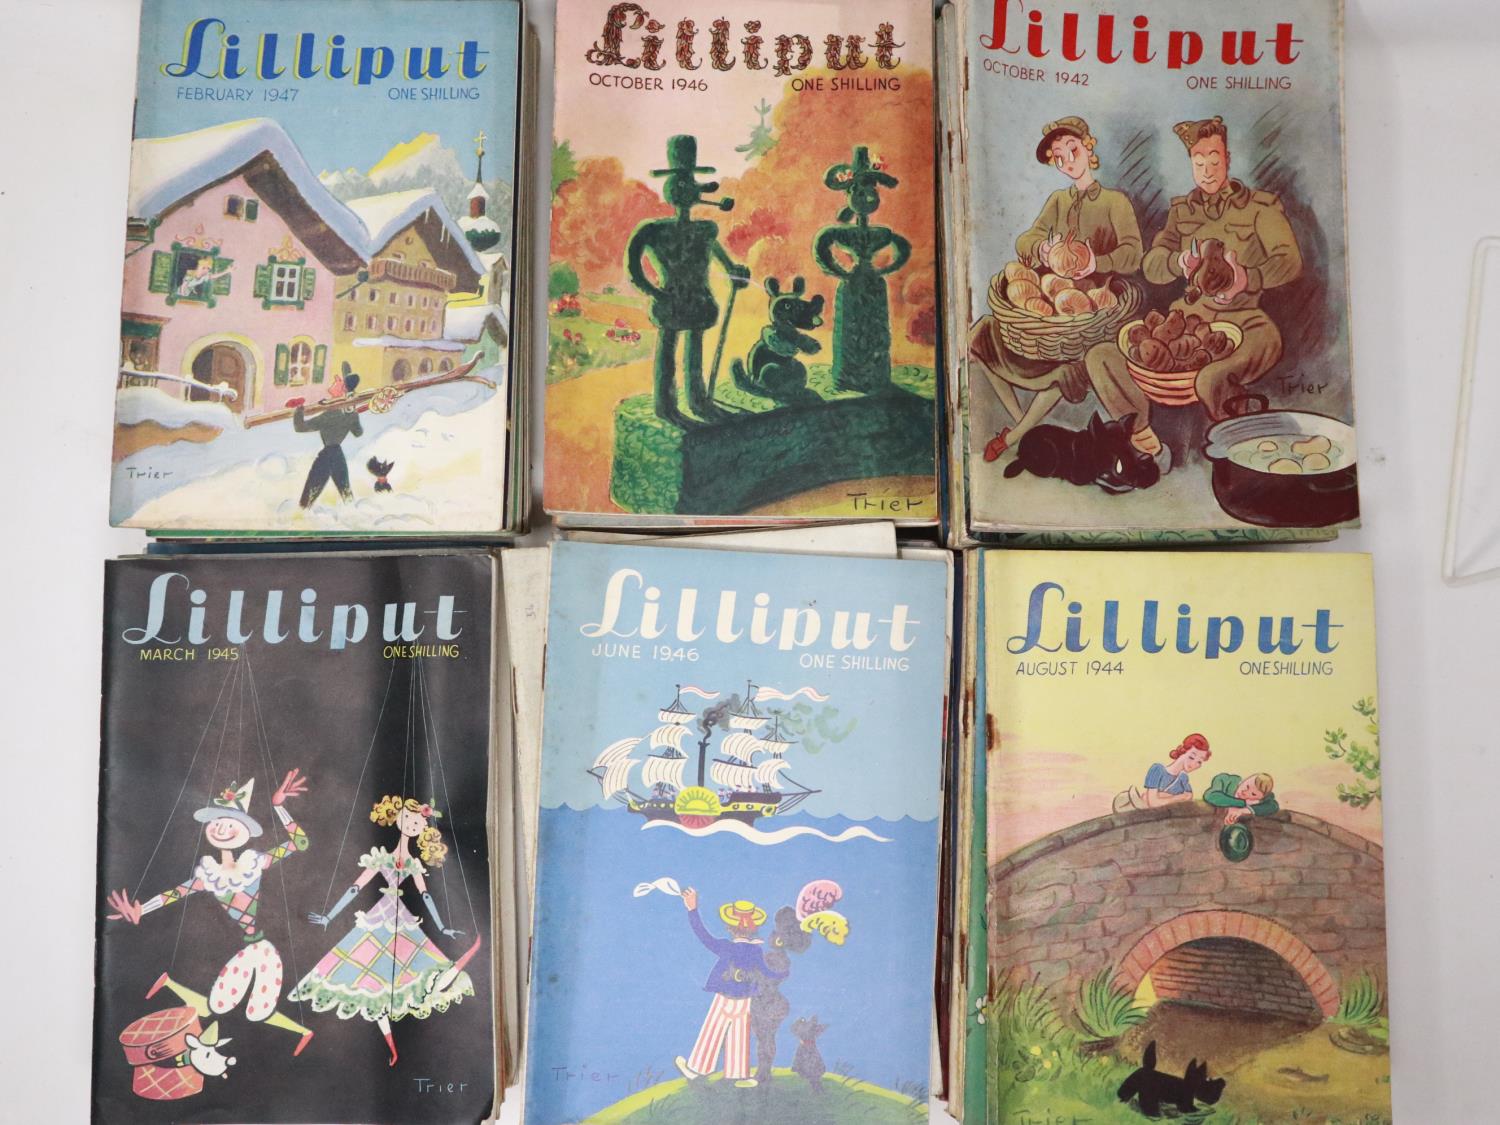 Approximately fifty copies of Lilliput magazines 1943 and later. Not available for in-house P&P